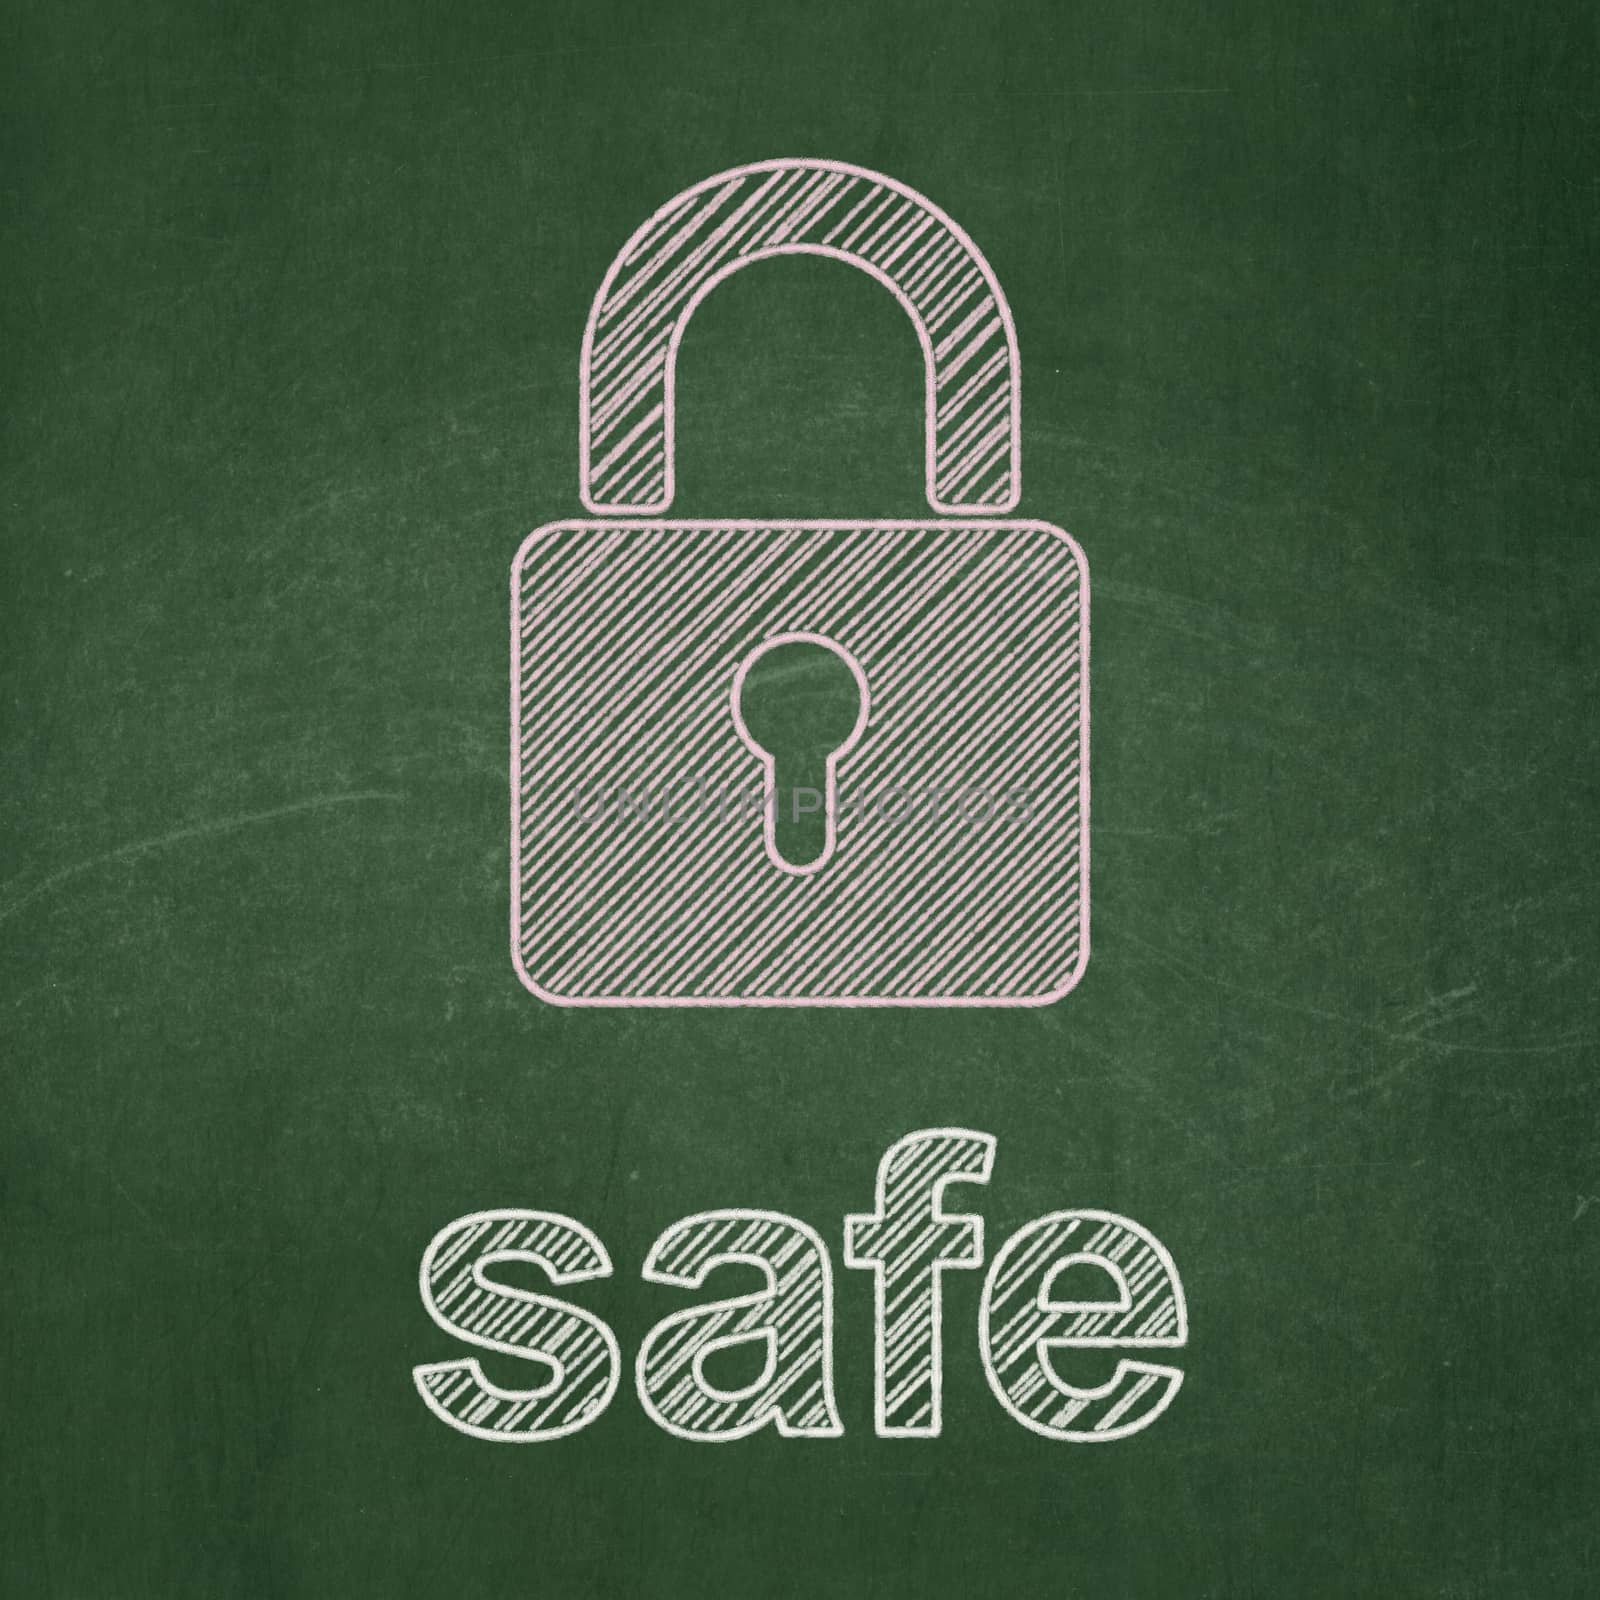 Protection concept: Closed Padlock icon and text Safe on Green chalkboard background, 3d render